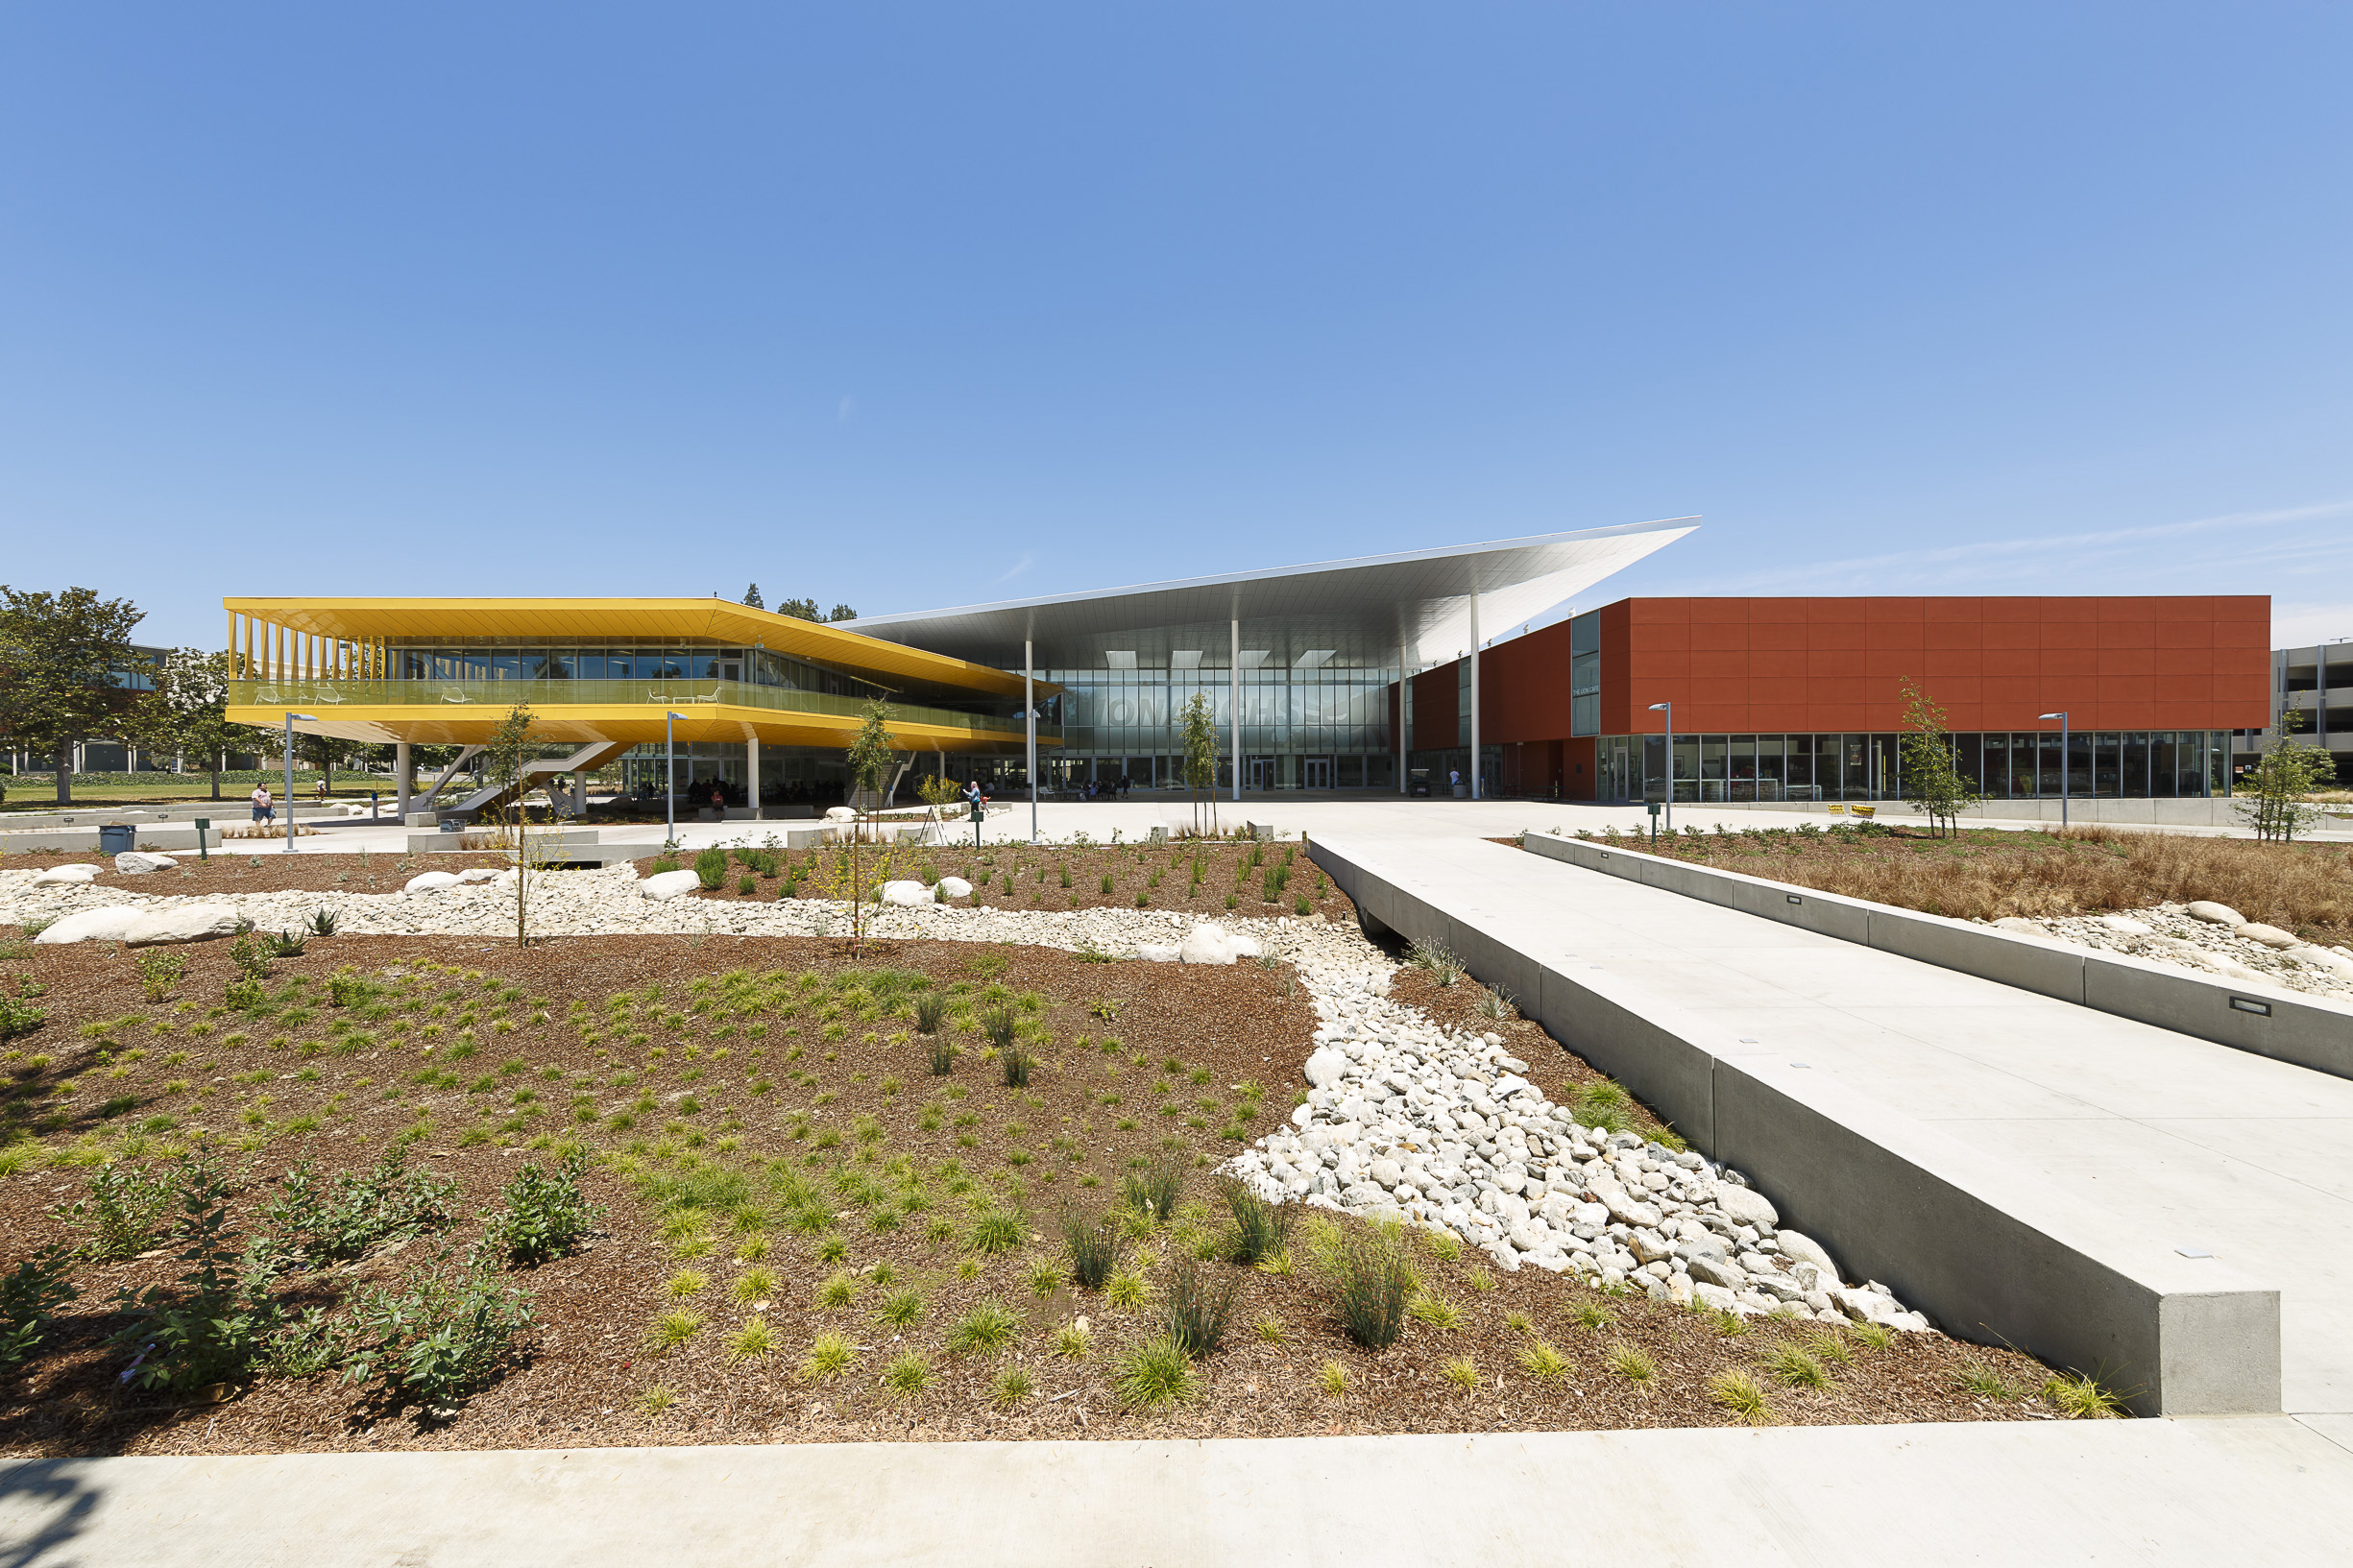 Los Angeles Valley College Completes New Student Center Designed by LPA